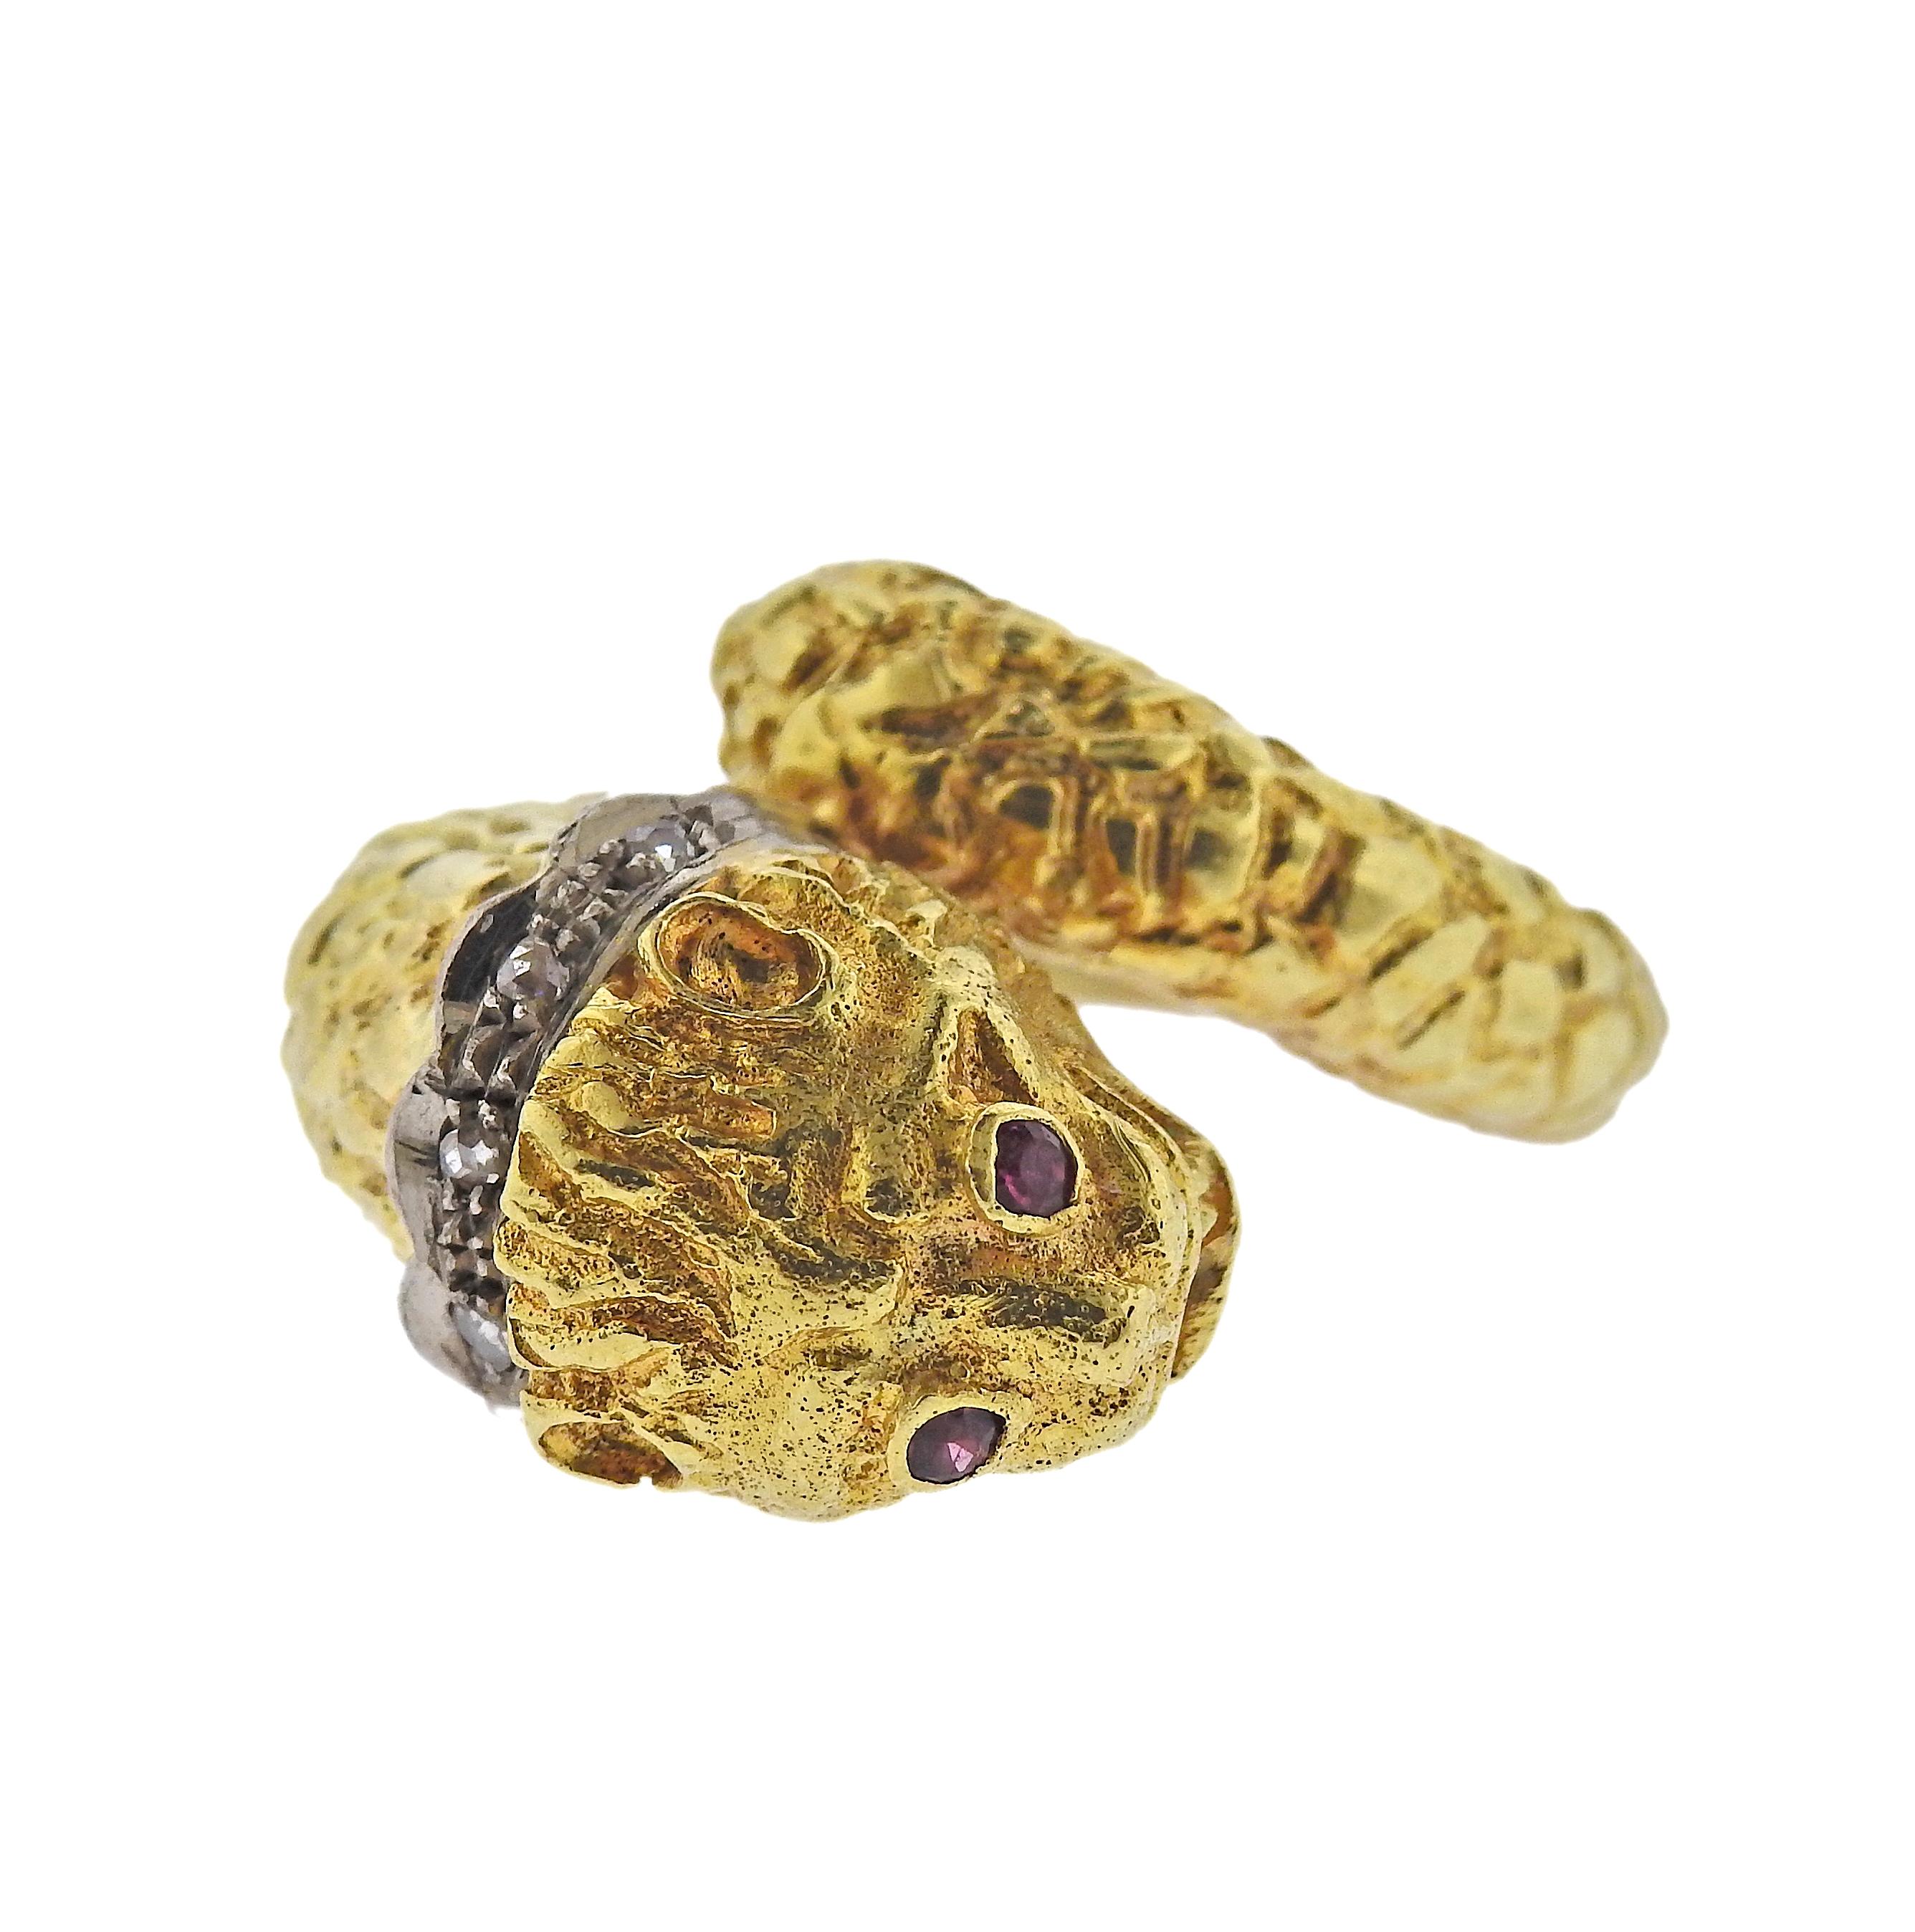 18k gold Chimera ring by Greek designer Ilias Lalaounis, adorned with ruby eyes and diamond collar. Ring size - 5, ring top is 18mm. Marked: 750, A21, Maker's mark. Weight - 11.6 grams.